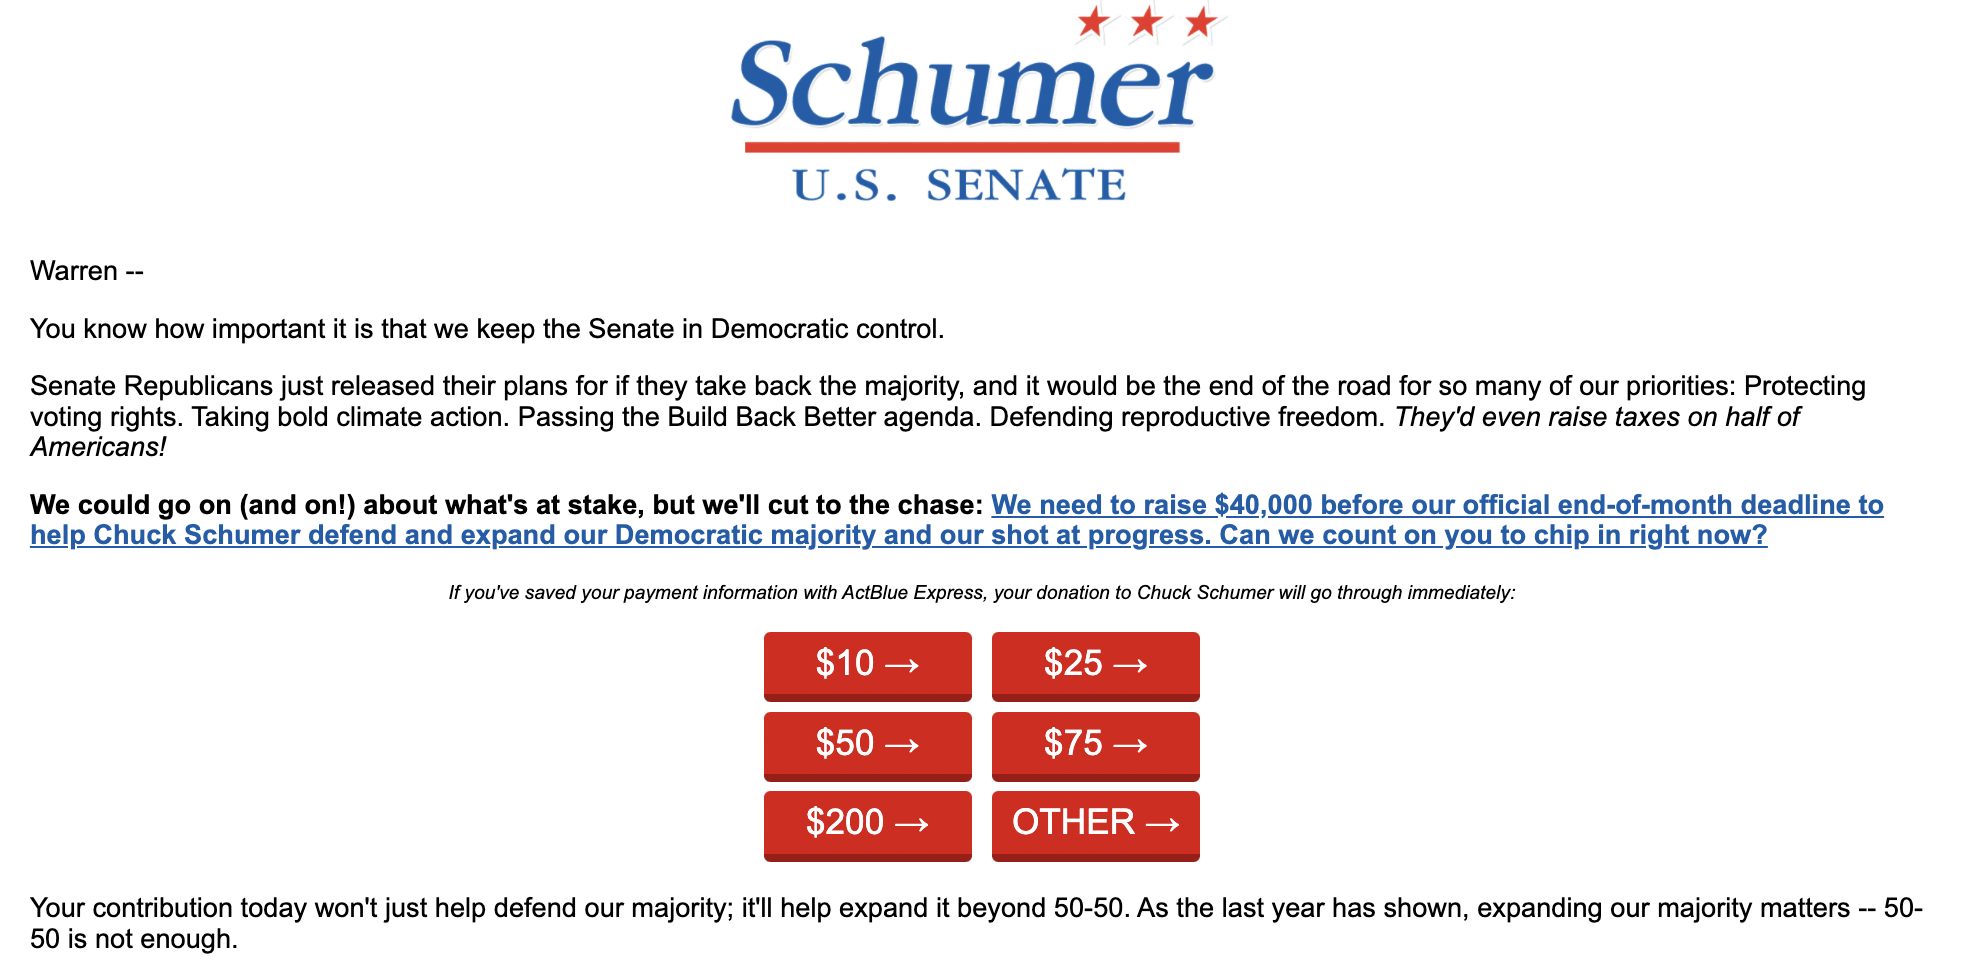 A snapshot of a campaign email from Senate Majority Leader Chuck Schumer requesting campaign contributions to help combat GOP Sen. Rick Scott's latest policy proposals.